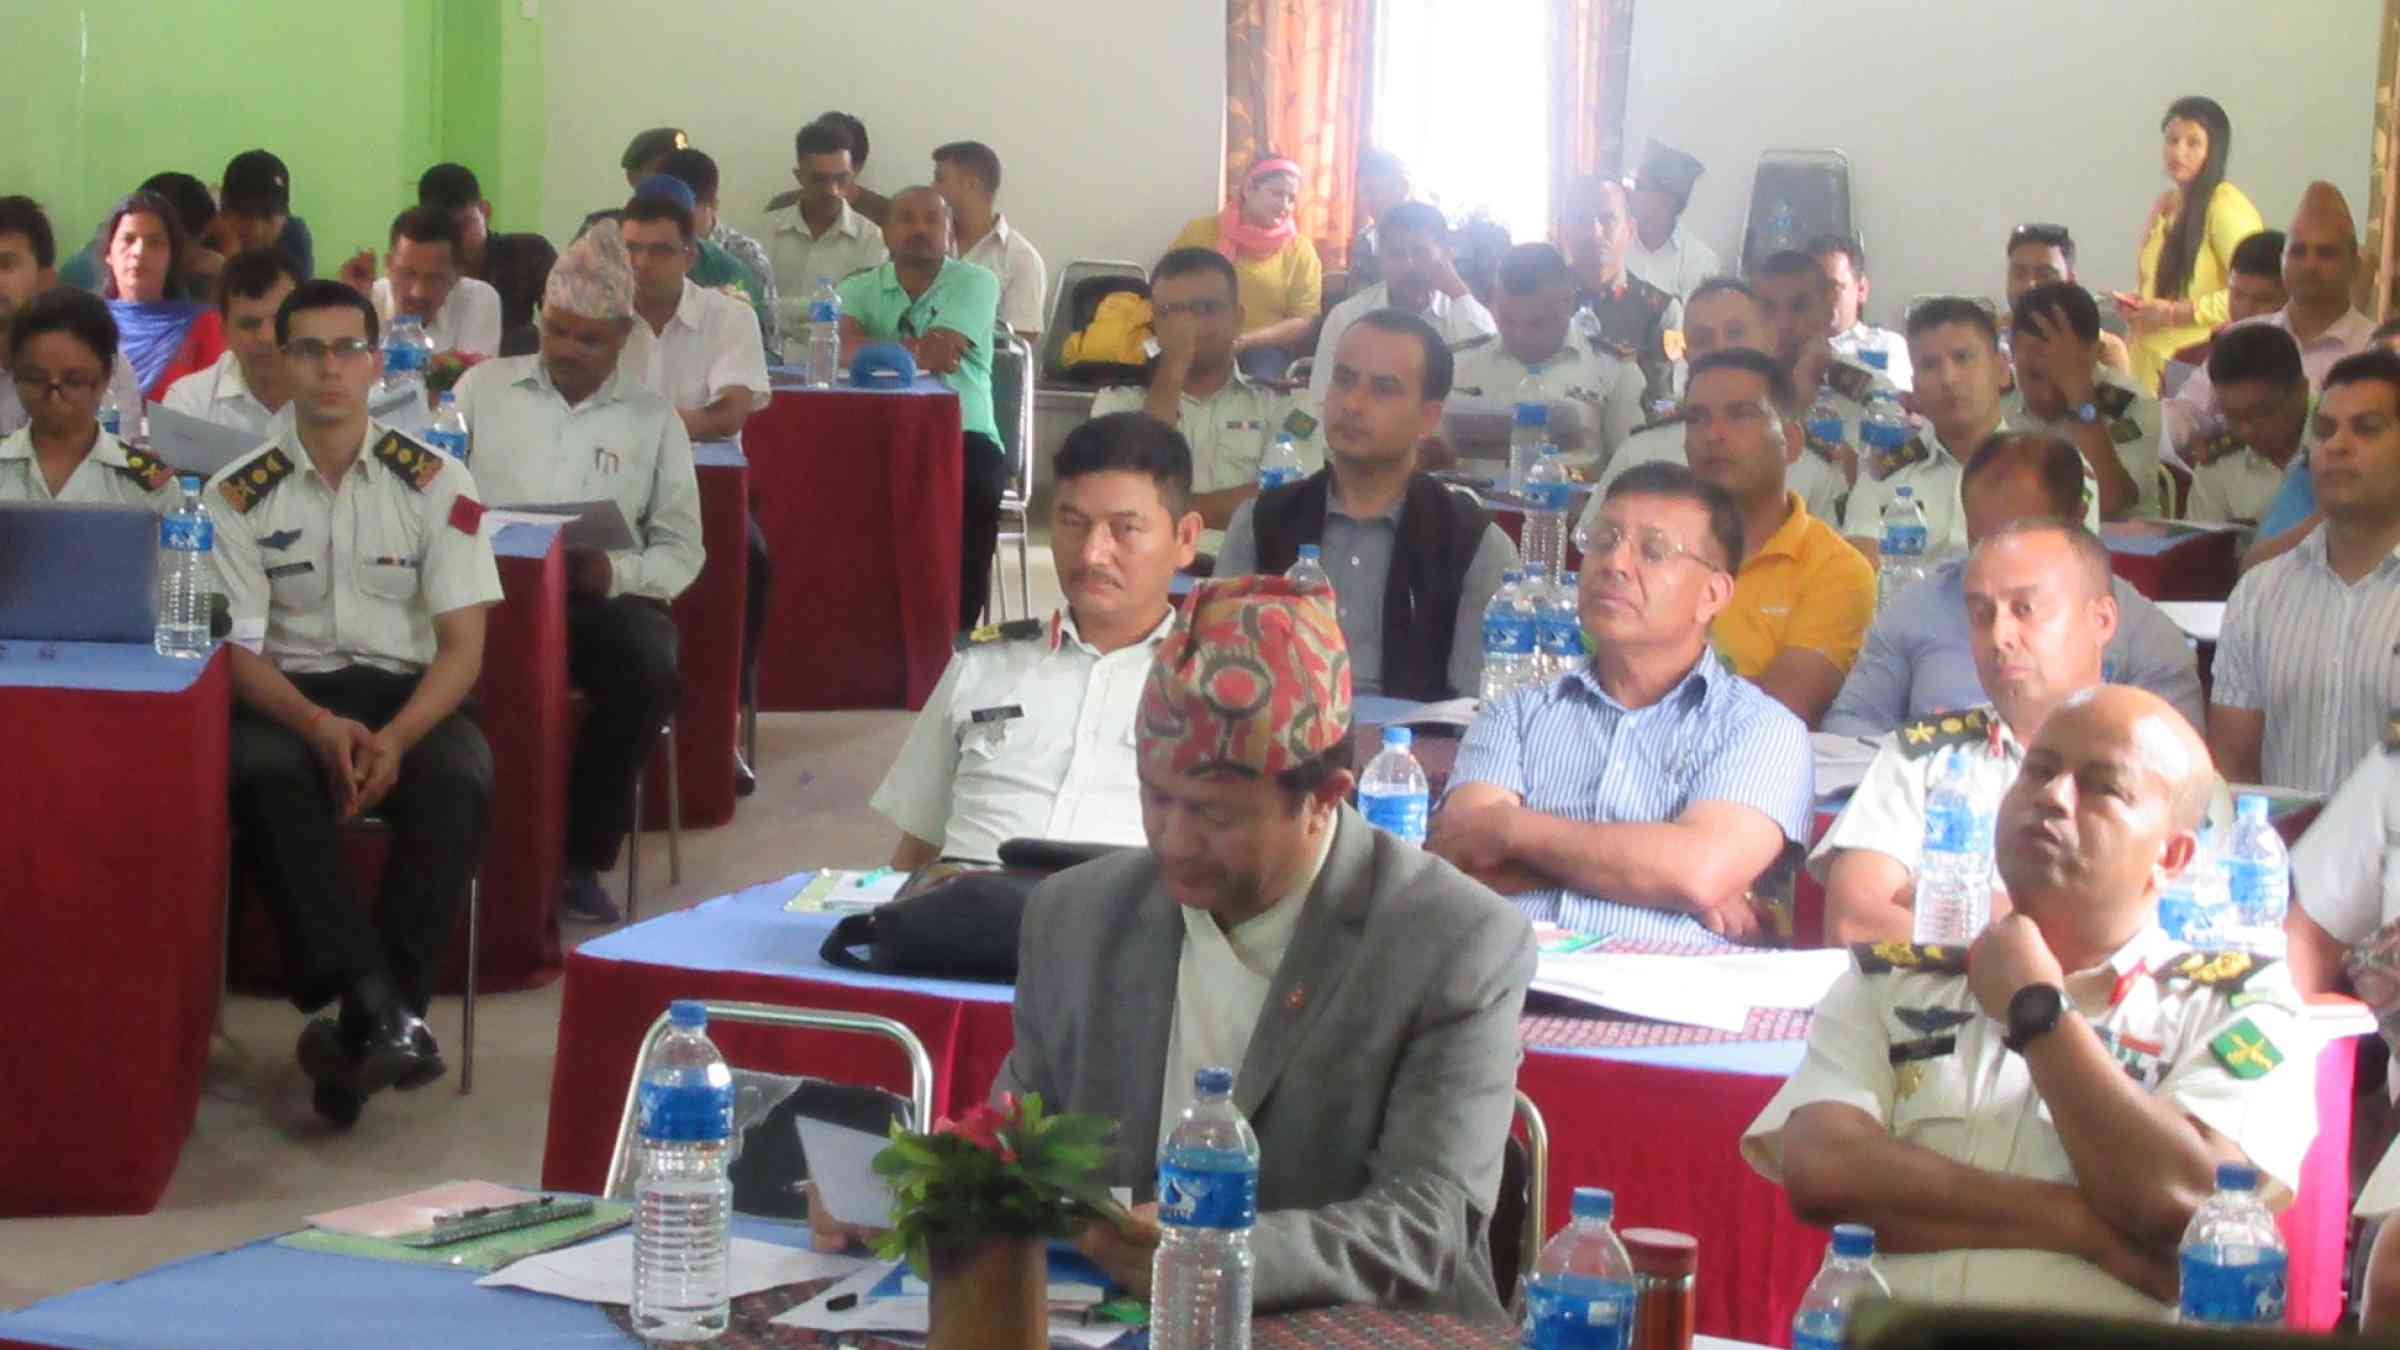 To ensure an inclusive approach to strategy development, the Sudurpaschim provincial government organized consultations in a number of districts. This is a photo of one such event on 30 June 2019.